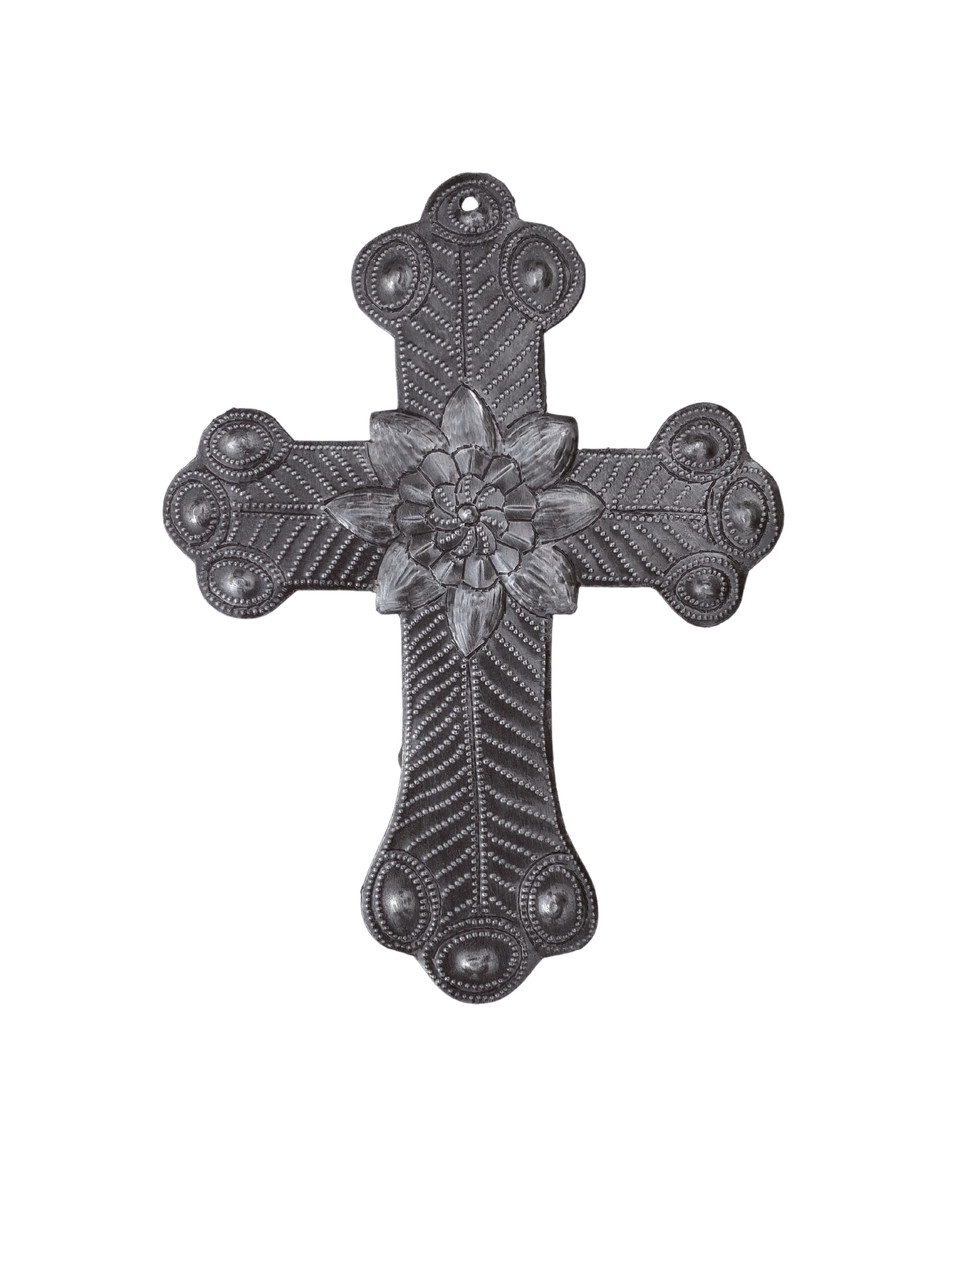 Haitain Metal Art: Whimsical Cross
Upcycled Artwork: Hand Embossed Religious Artwork
Home Decor: Religious Decorative Wall Hanging Plaques
Whether you are seeking a heartfelt gift for a loved one or a meaningful addition to your own collection, our Small Metal Cross with Flower from Haiti is the perfect choice. Embrace its unique blend of spirituality, craftsmanship, and beauty, and let it become a cherished symbol of faith, hope, and resilience.